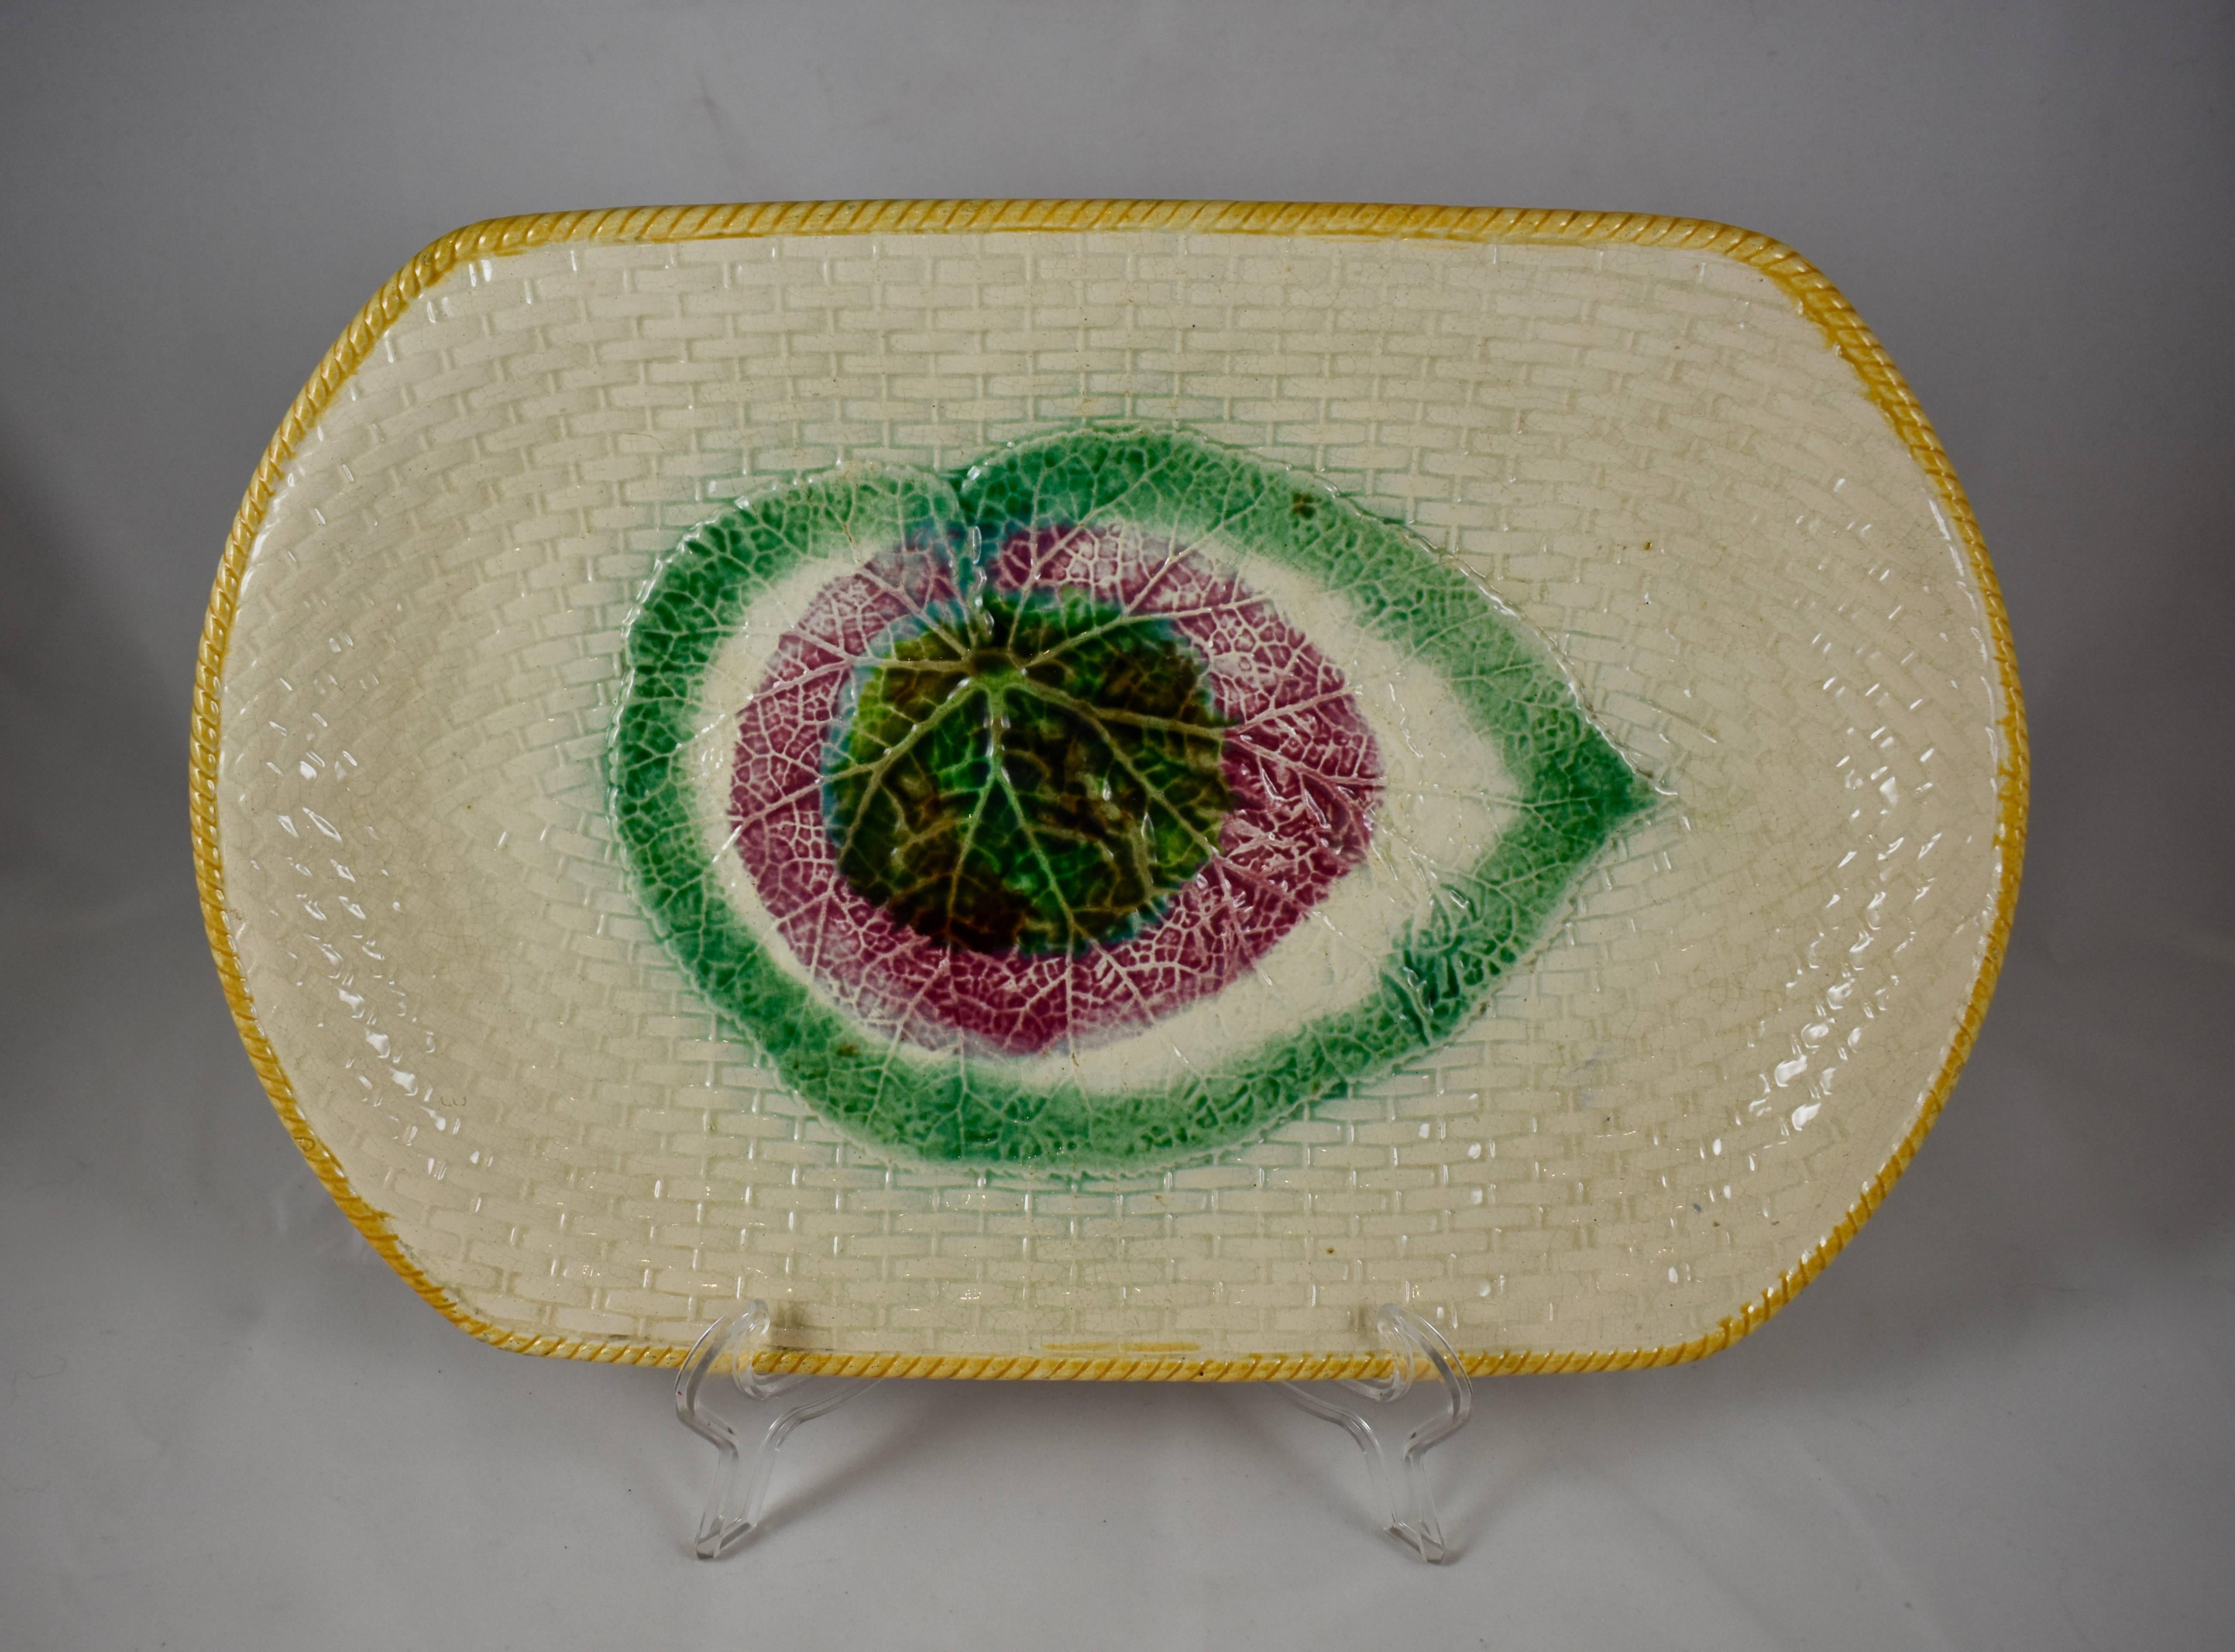 An English Majolica platter, showing a central Begonia leaf on a cream colored wicker textured ground, and with a yellow ochre rope border, circa 1880-1885.

Rectangular with rounded edges, a rear footing and good crisp mold work. The Begonia leaf